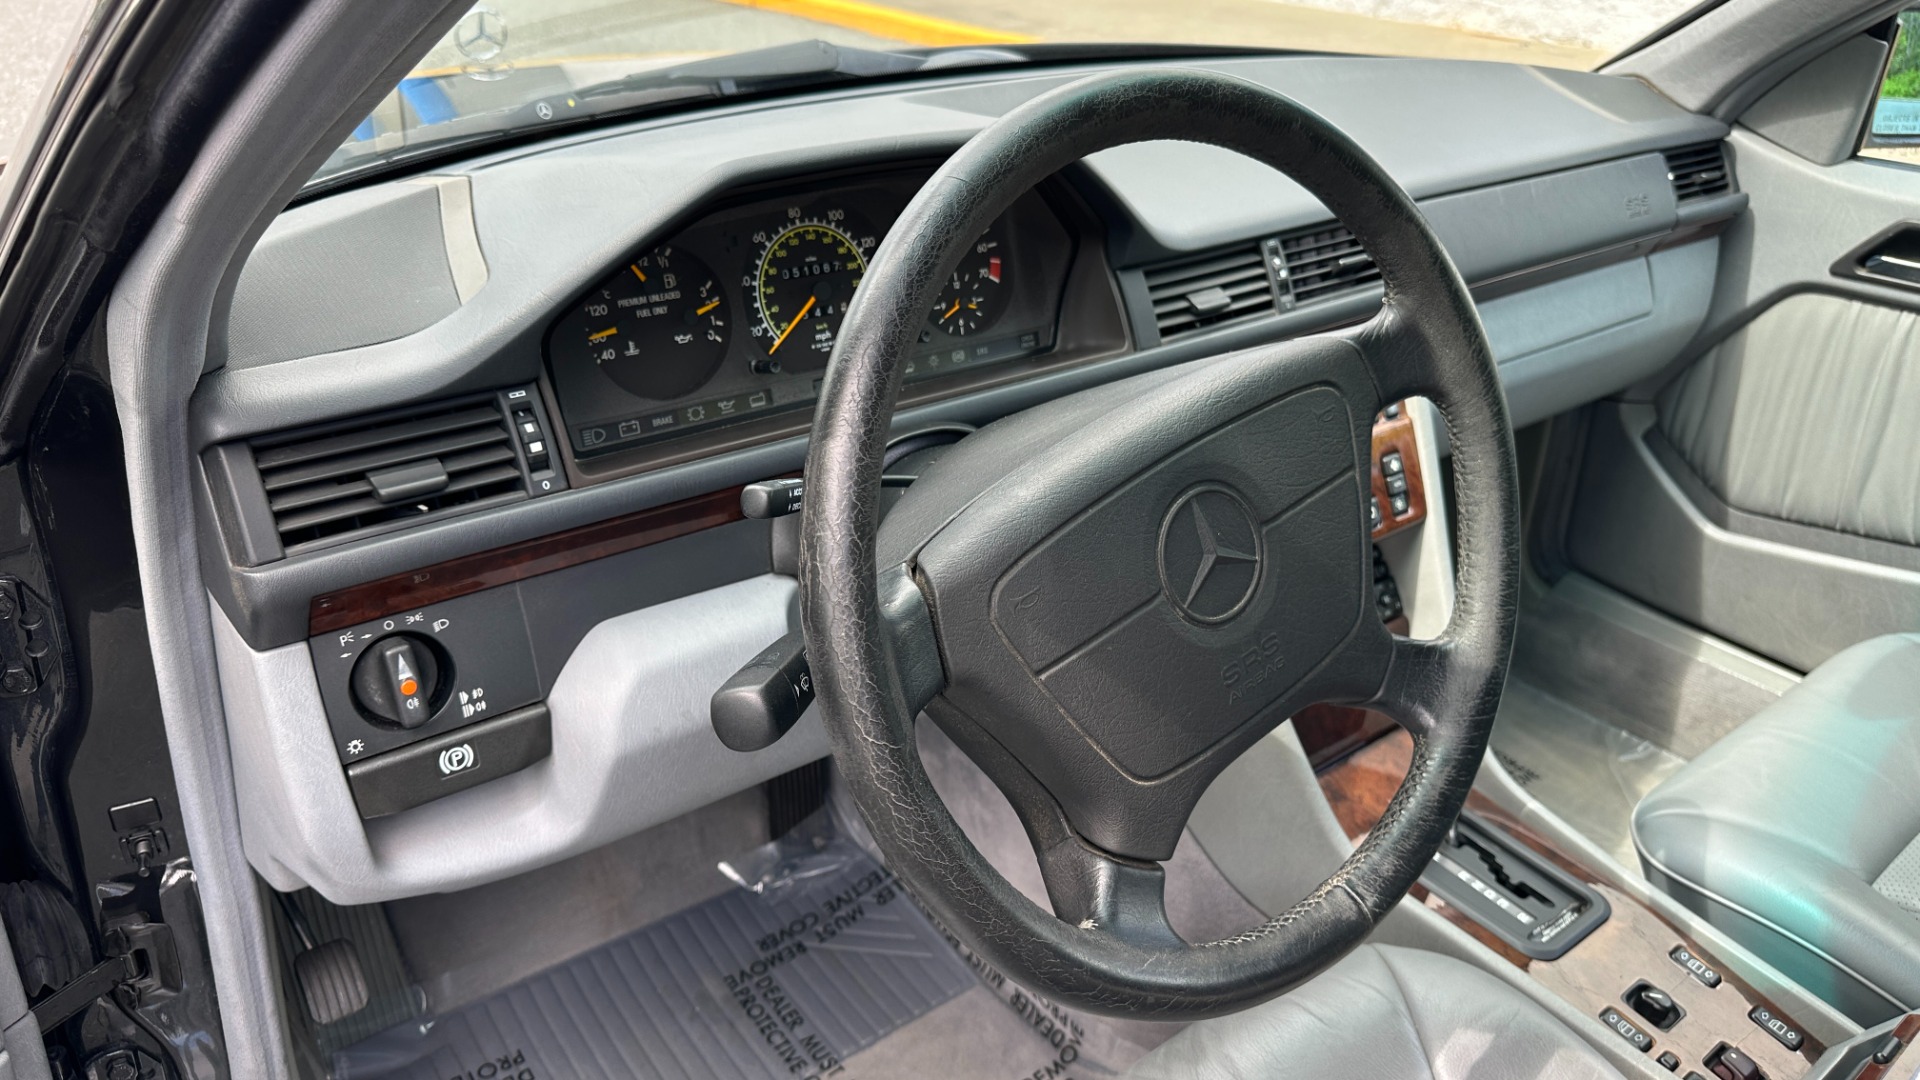 Used 1994 Mercedes-Benz 300 Series E 320 / CONVERTIBLE / MEMORY / POWER TOP / INLINE 6CYL / LEATHER for sale $17,000 at Formula Imports in Charlotte NC 28227 23